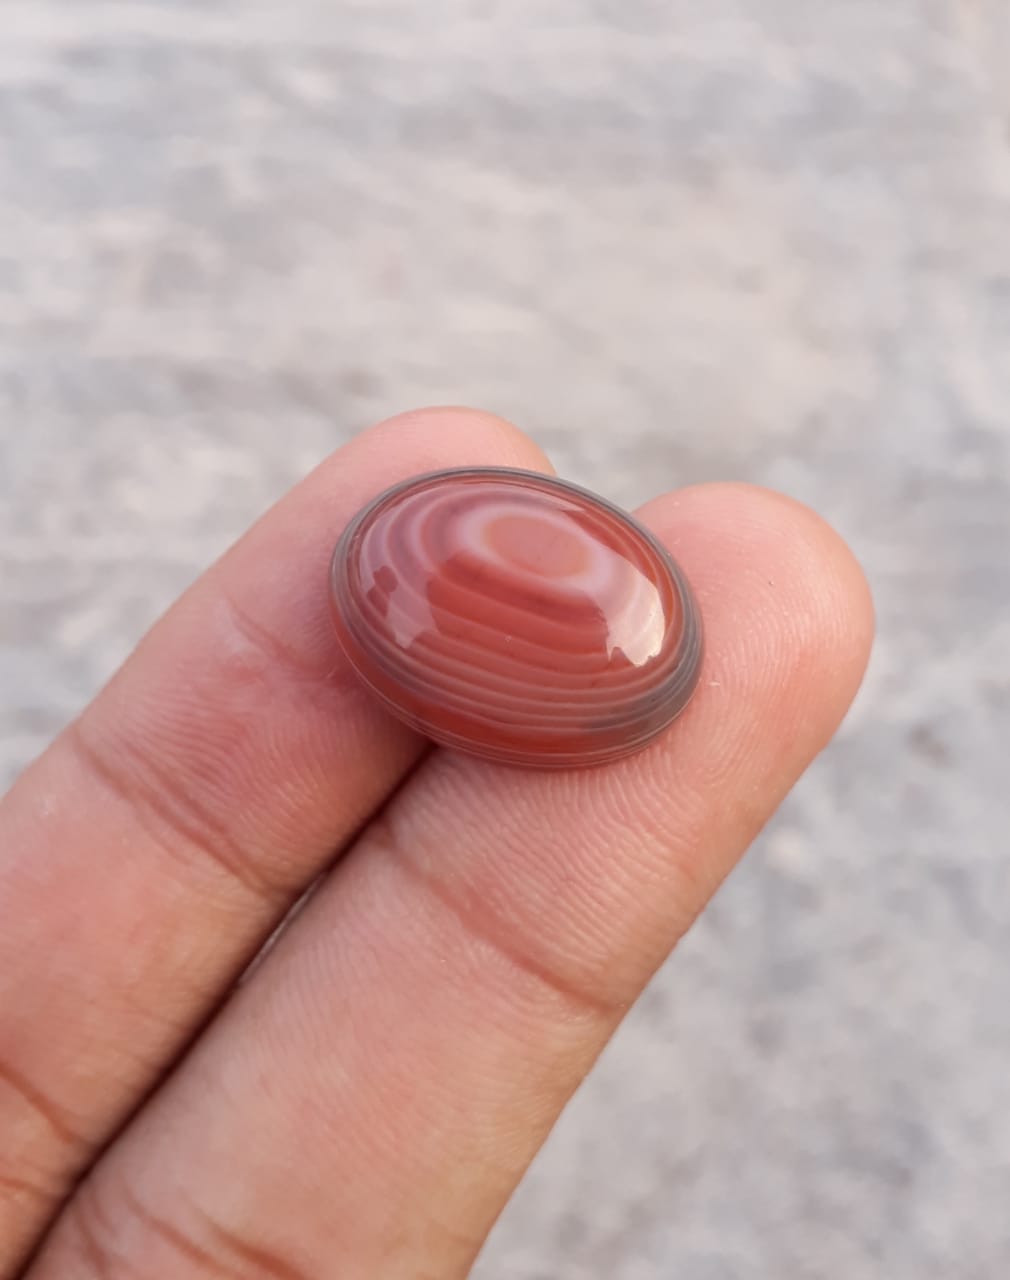 14.4ct Natural Red Eye Agate For Sale - Aqeeq - Dimension 20x15x6mm